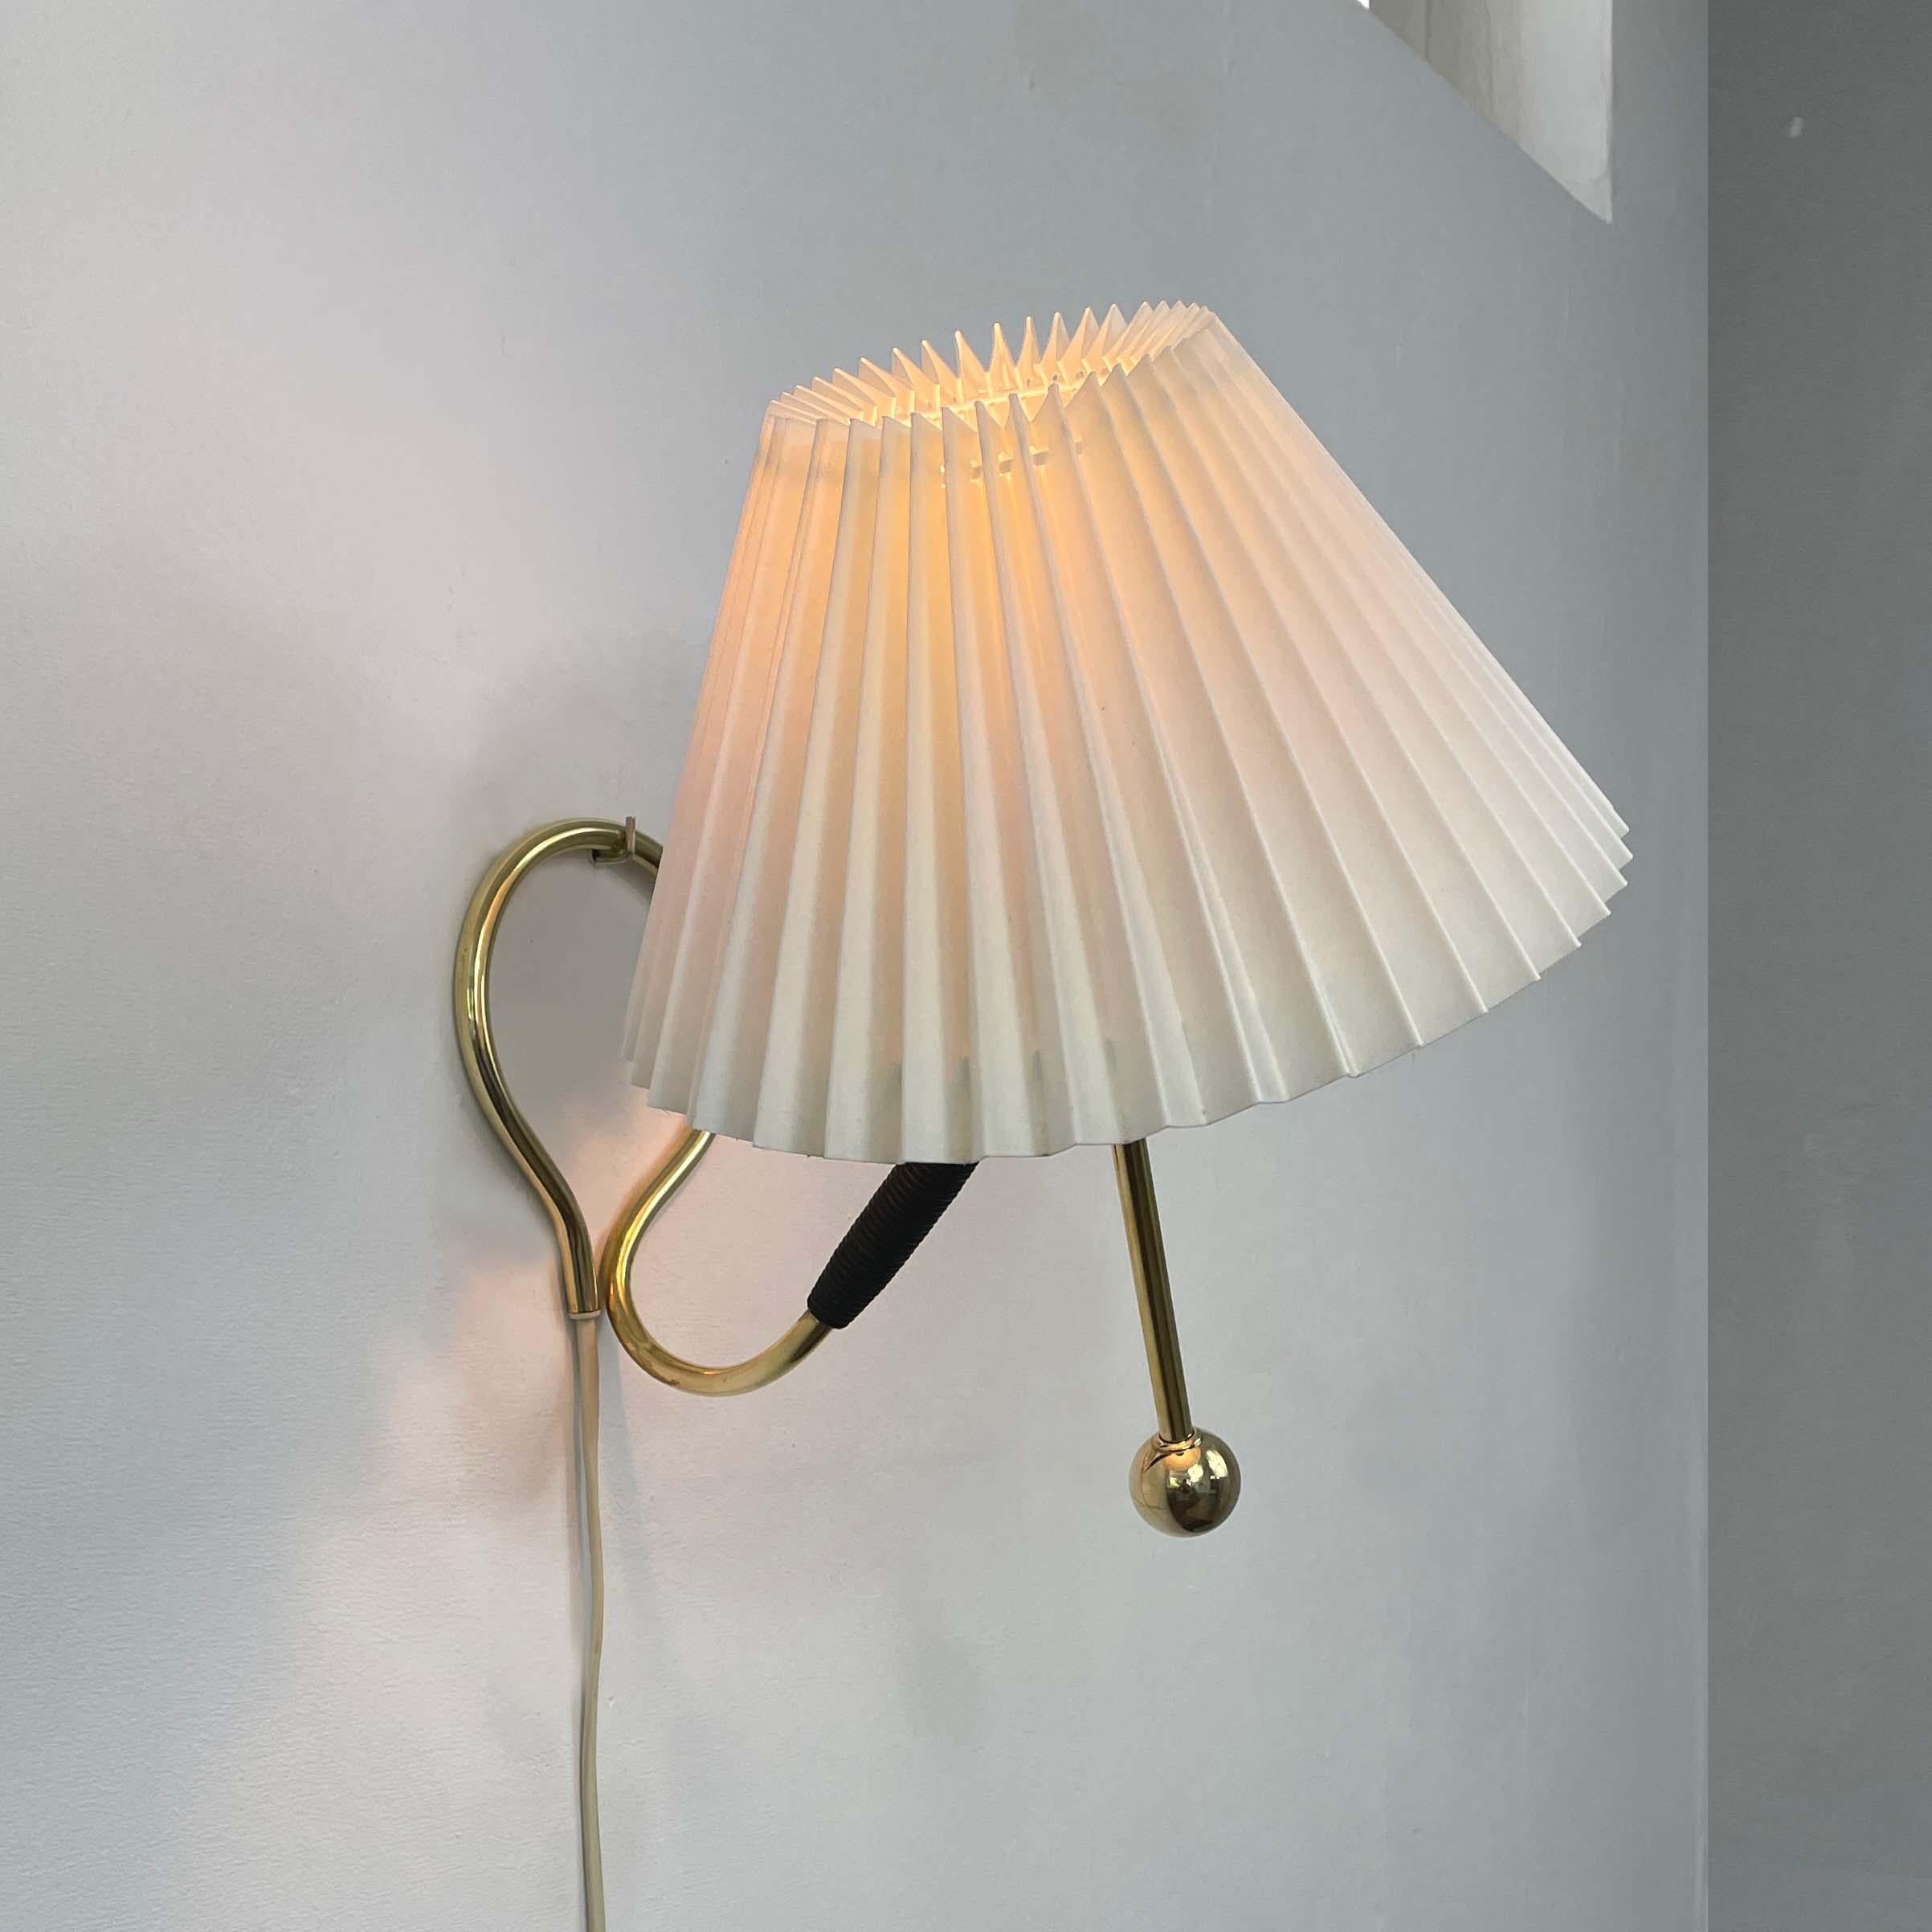 Adjustable Brass and Bakelite Wall and Table Lamp 306 by Kaare Klint, 1950s For Sale 10